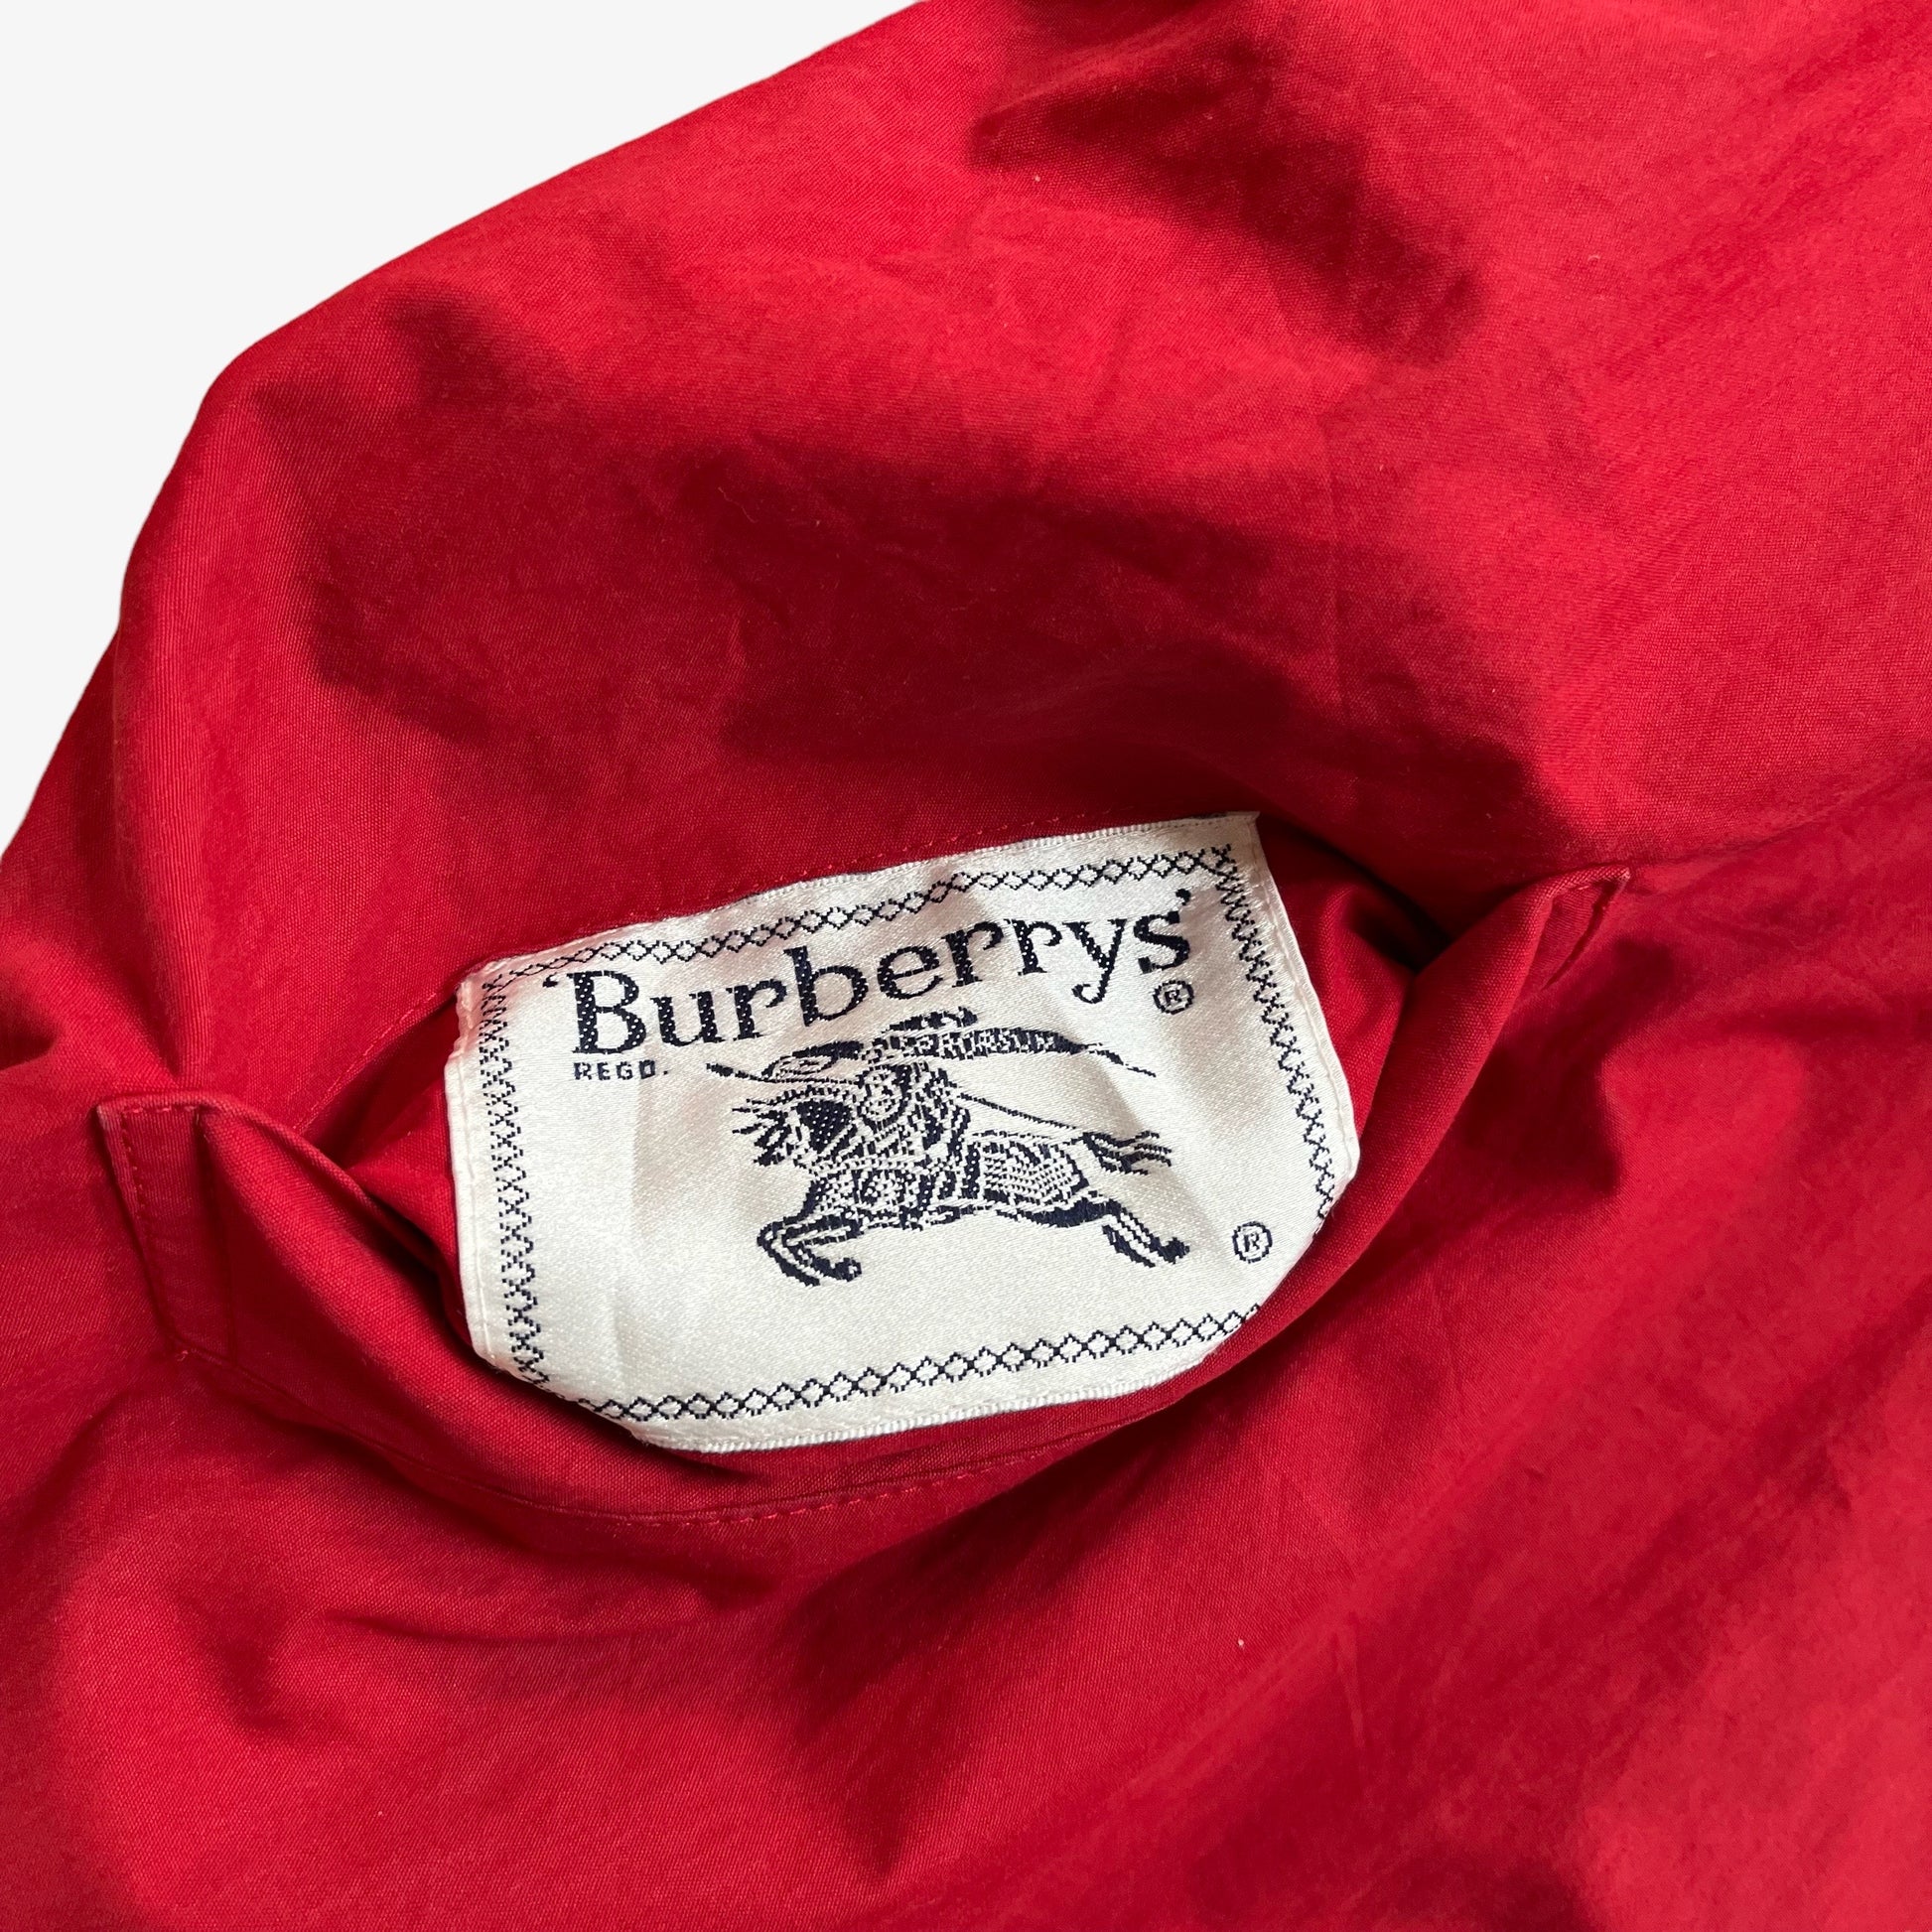 Vintage 80s Burberry Navy Check Reversible Red Jacket Label - Casspios Dream